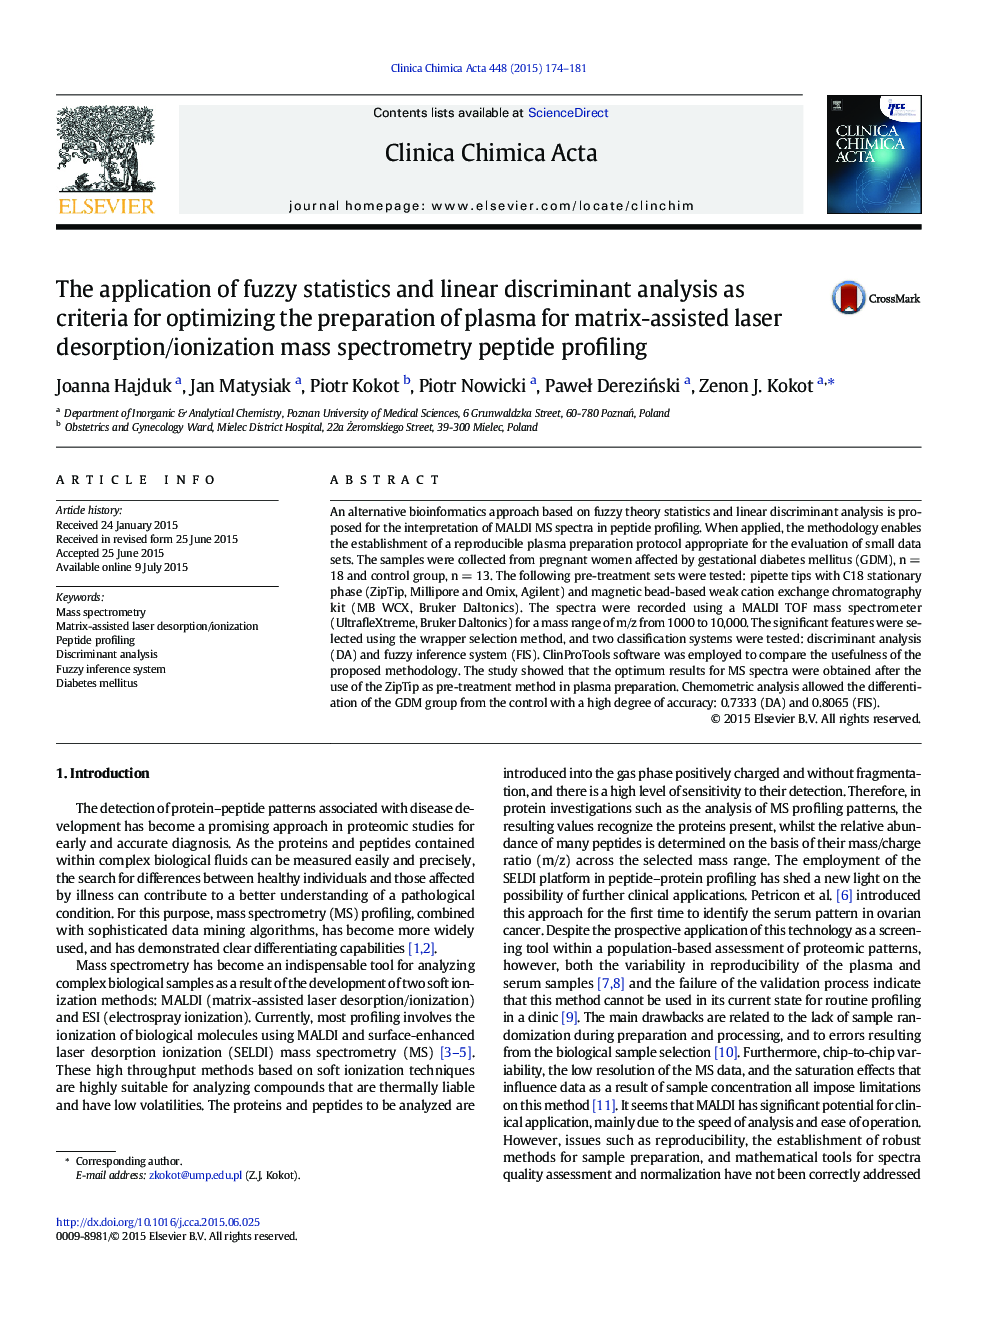 The application of fuzzy statistics and linear discriminant analysis as criteria for optimizing the preparation of plasma for matrix-assisted laser desorption/ionization mass spectrometry peptide profiling